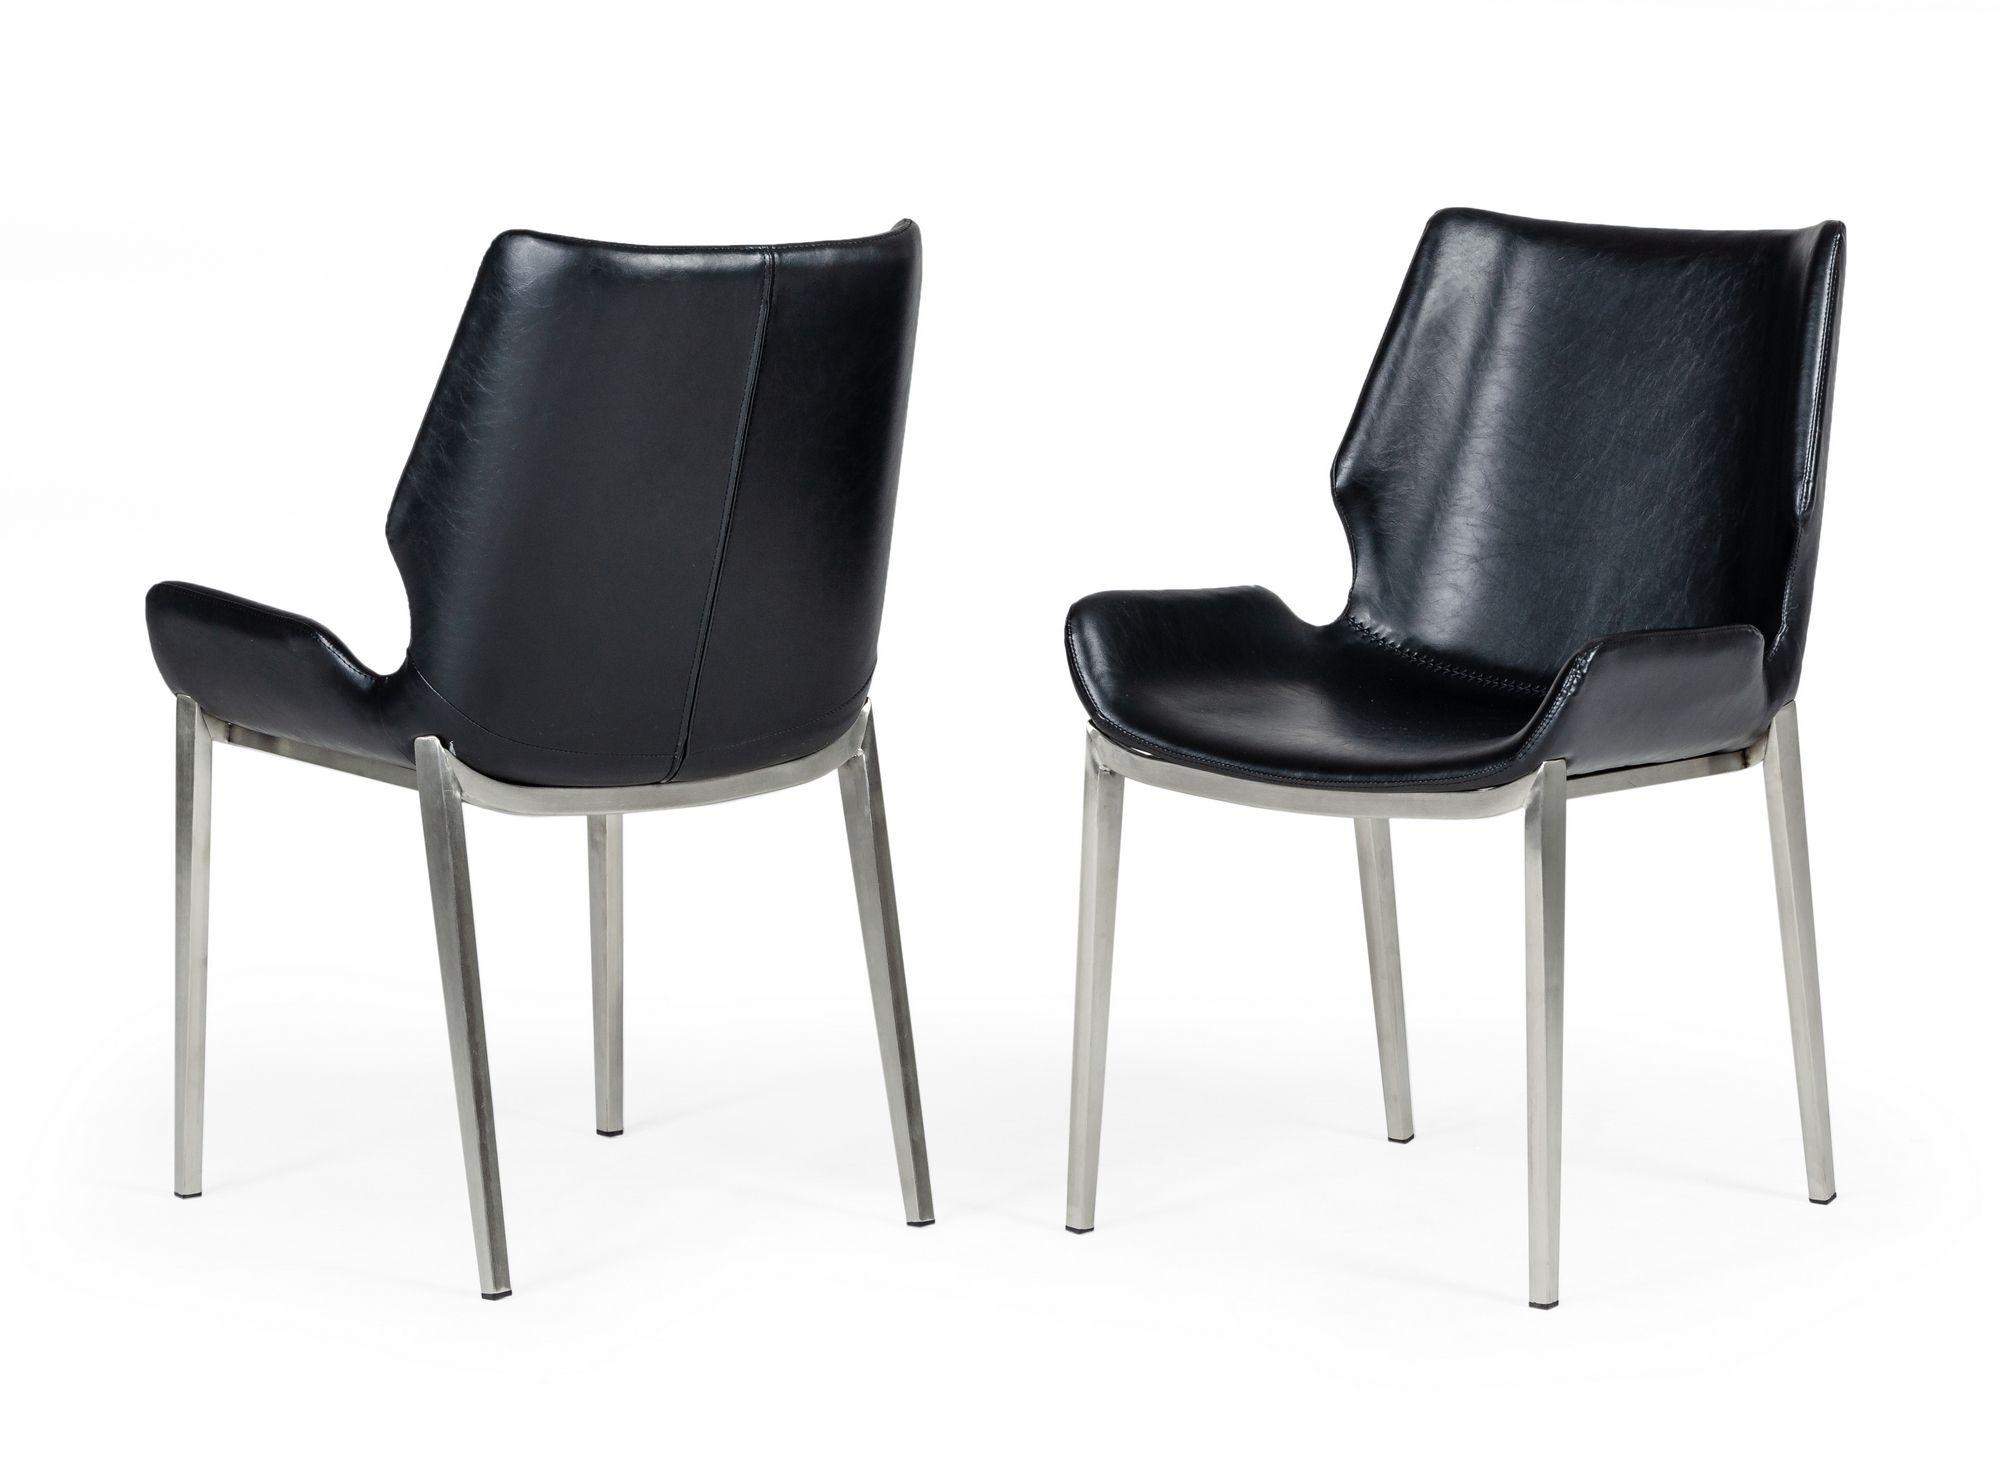 Contemporary, Modern Dining Chair Set Tina VGHR3513-2pcs in Black Eco-Leather